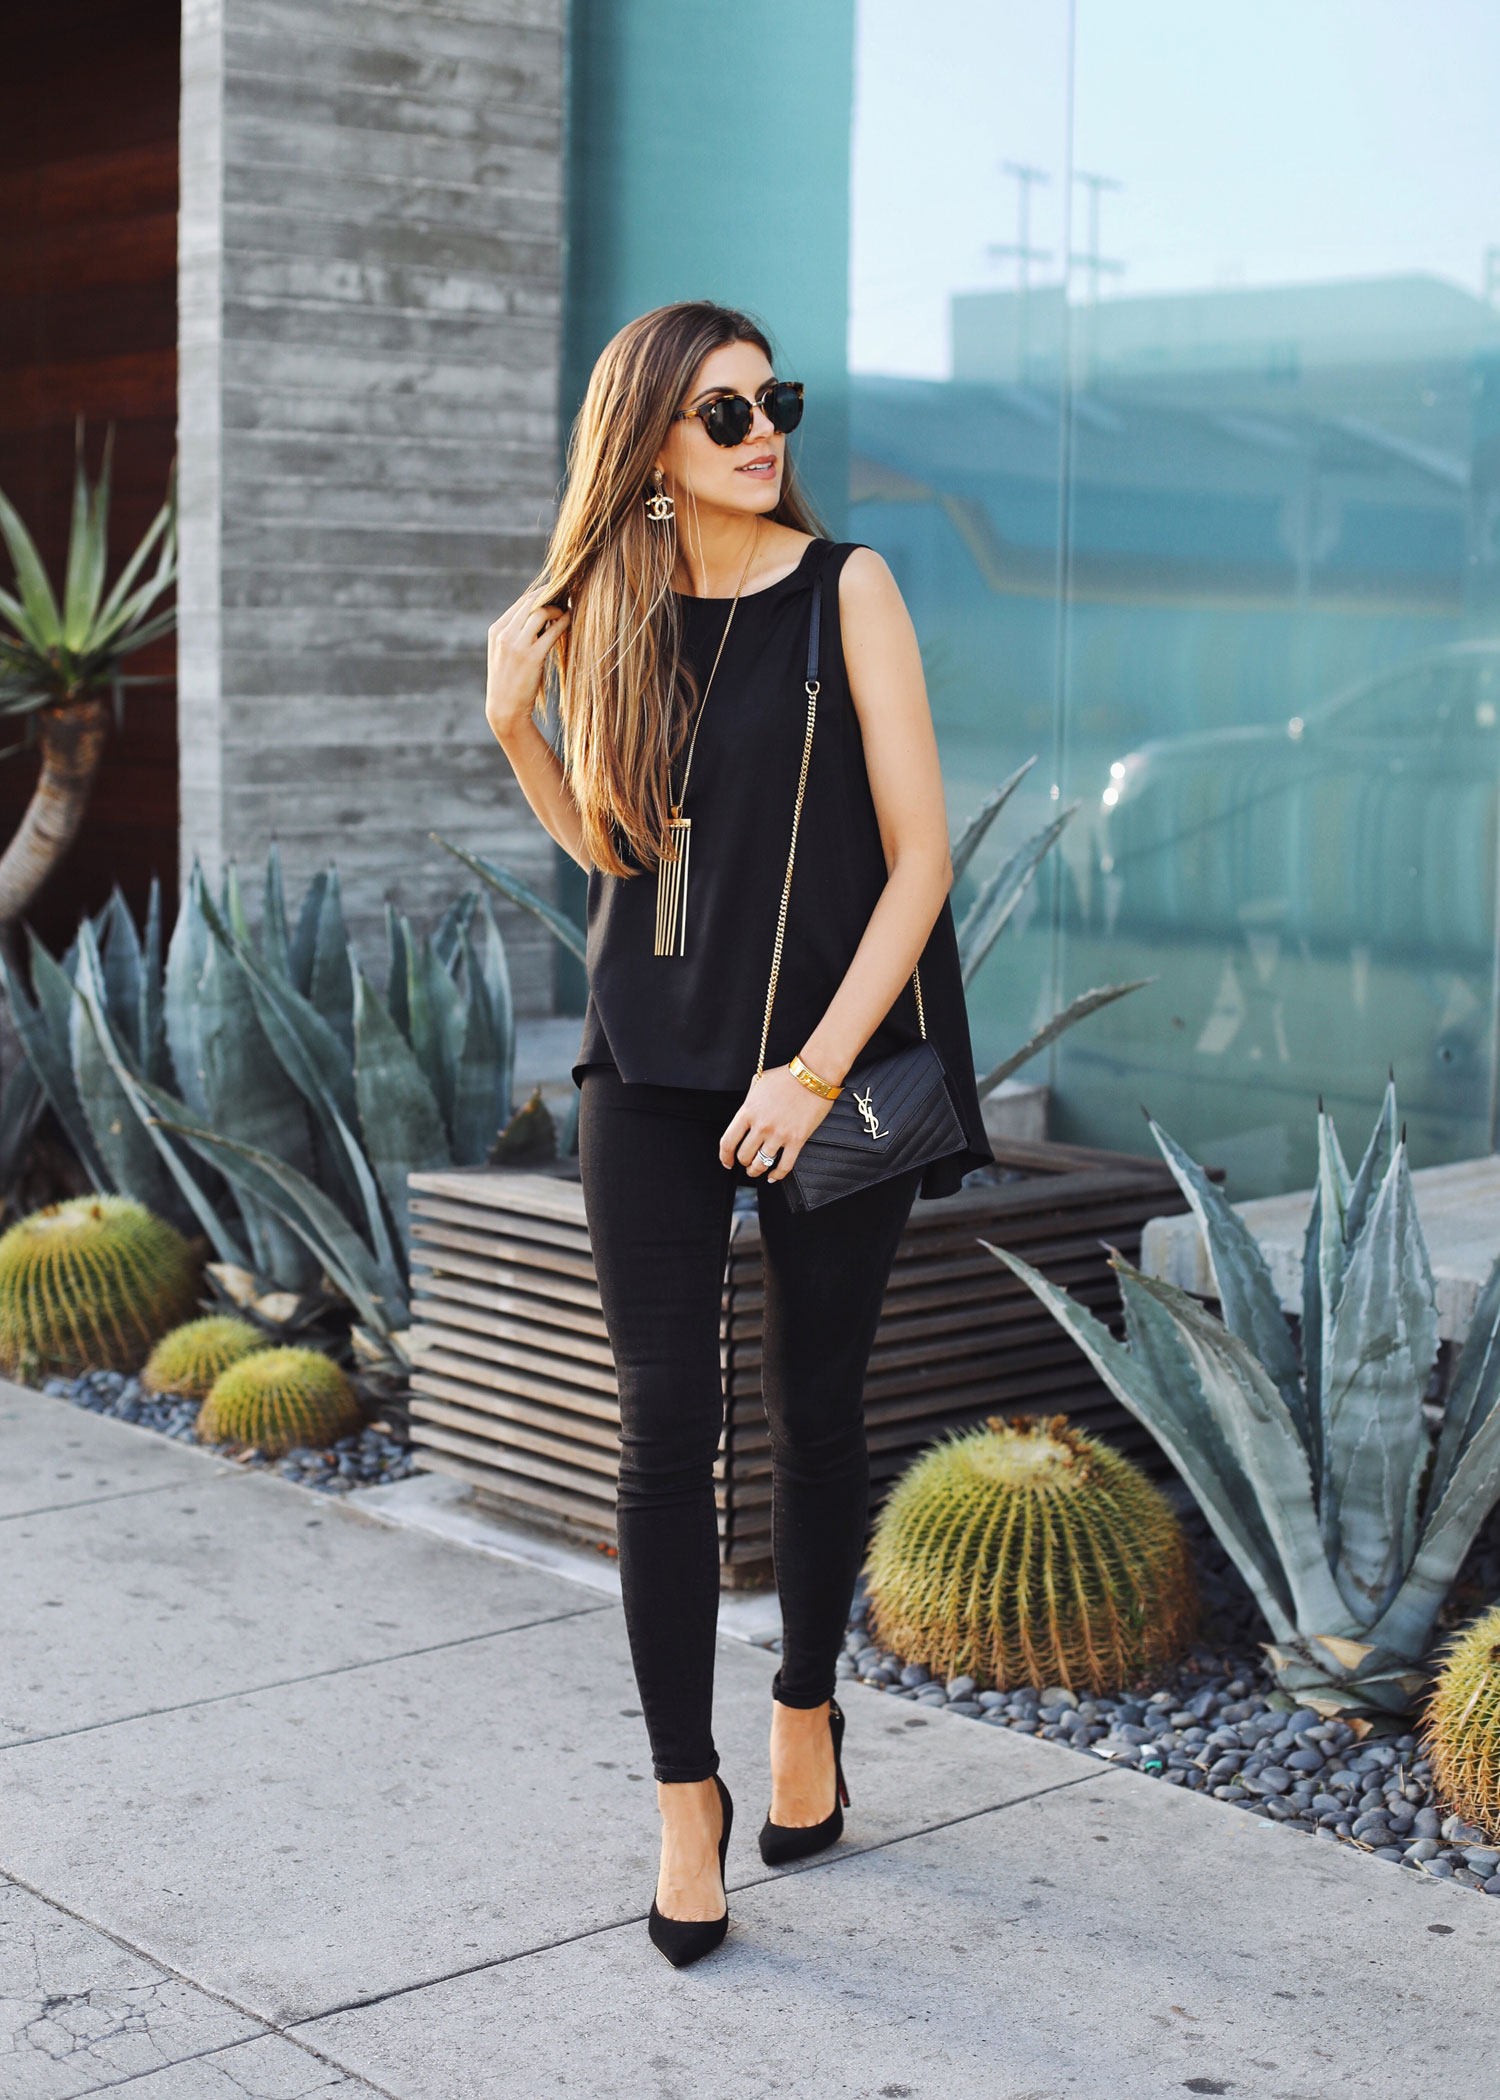 All-Black-Gold-Outfit | The Charming Olive by Adelina Perrin